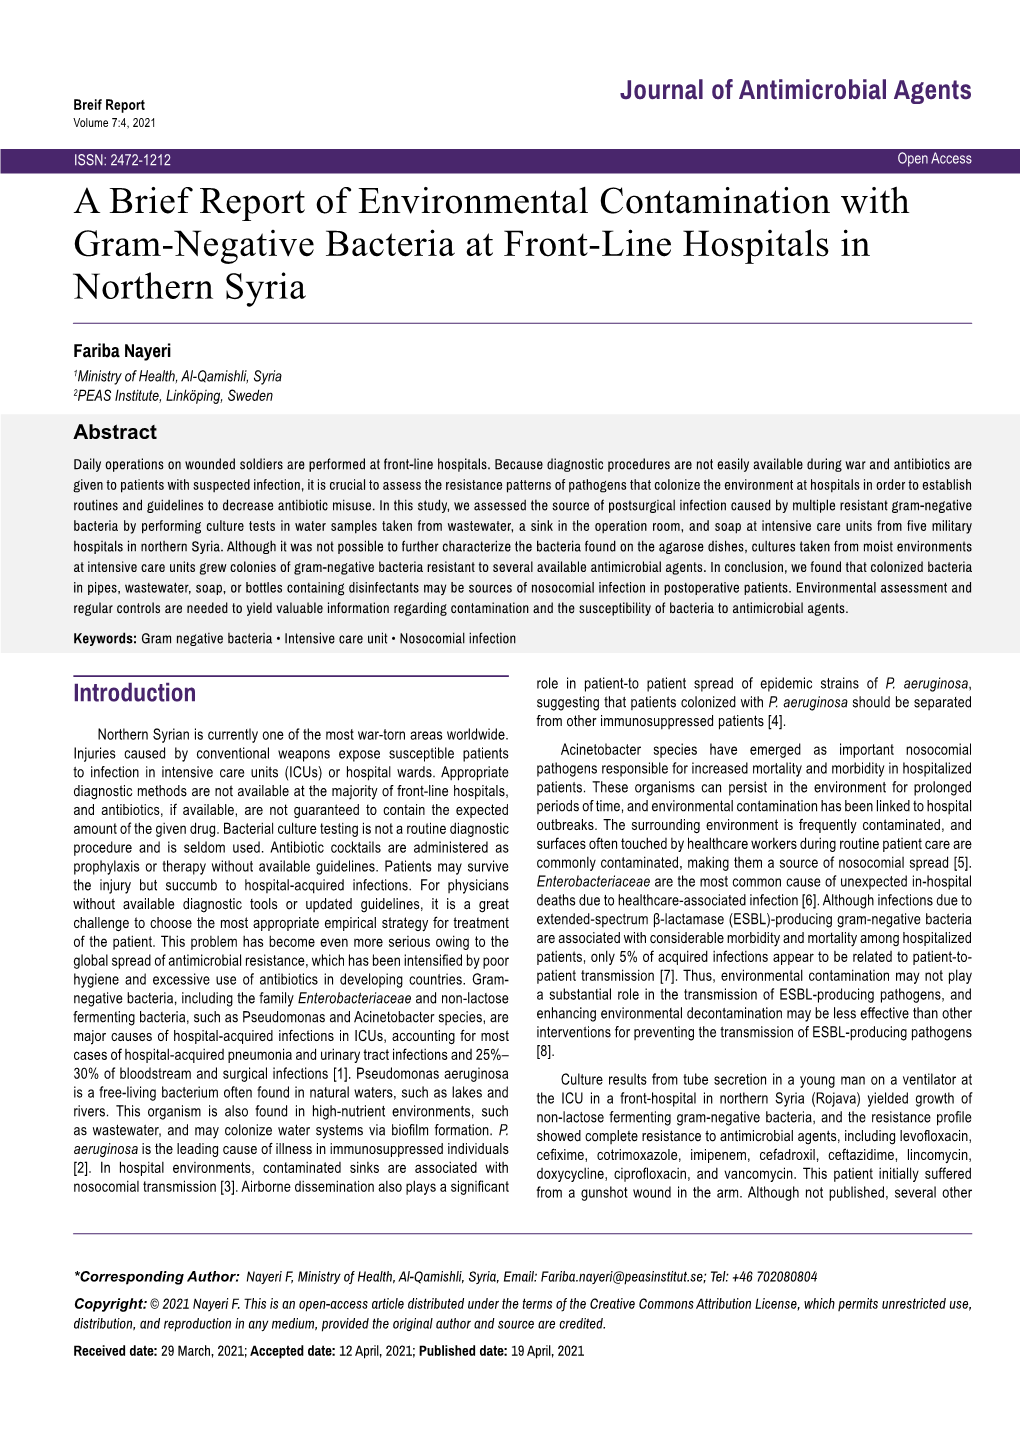 A Brief Report of Environmental Contamination with Gram-Negative Bacteria at Front-Line Hospitals in Northern Syria